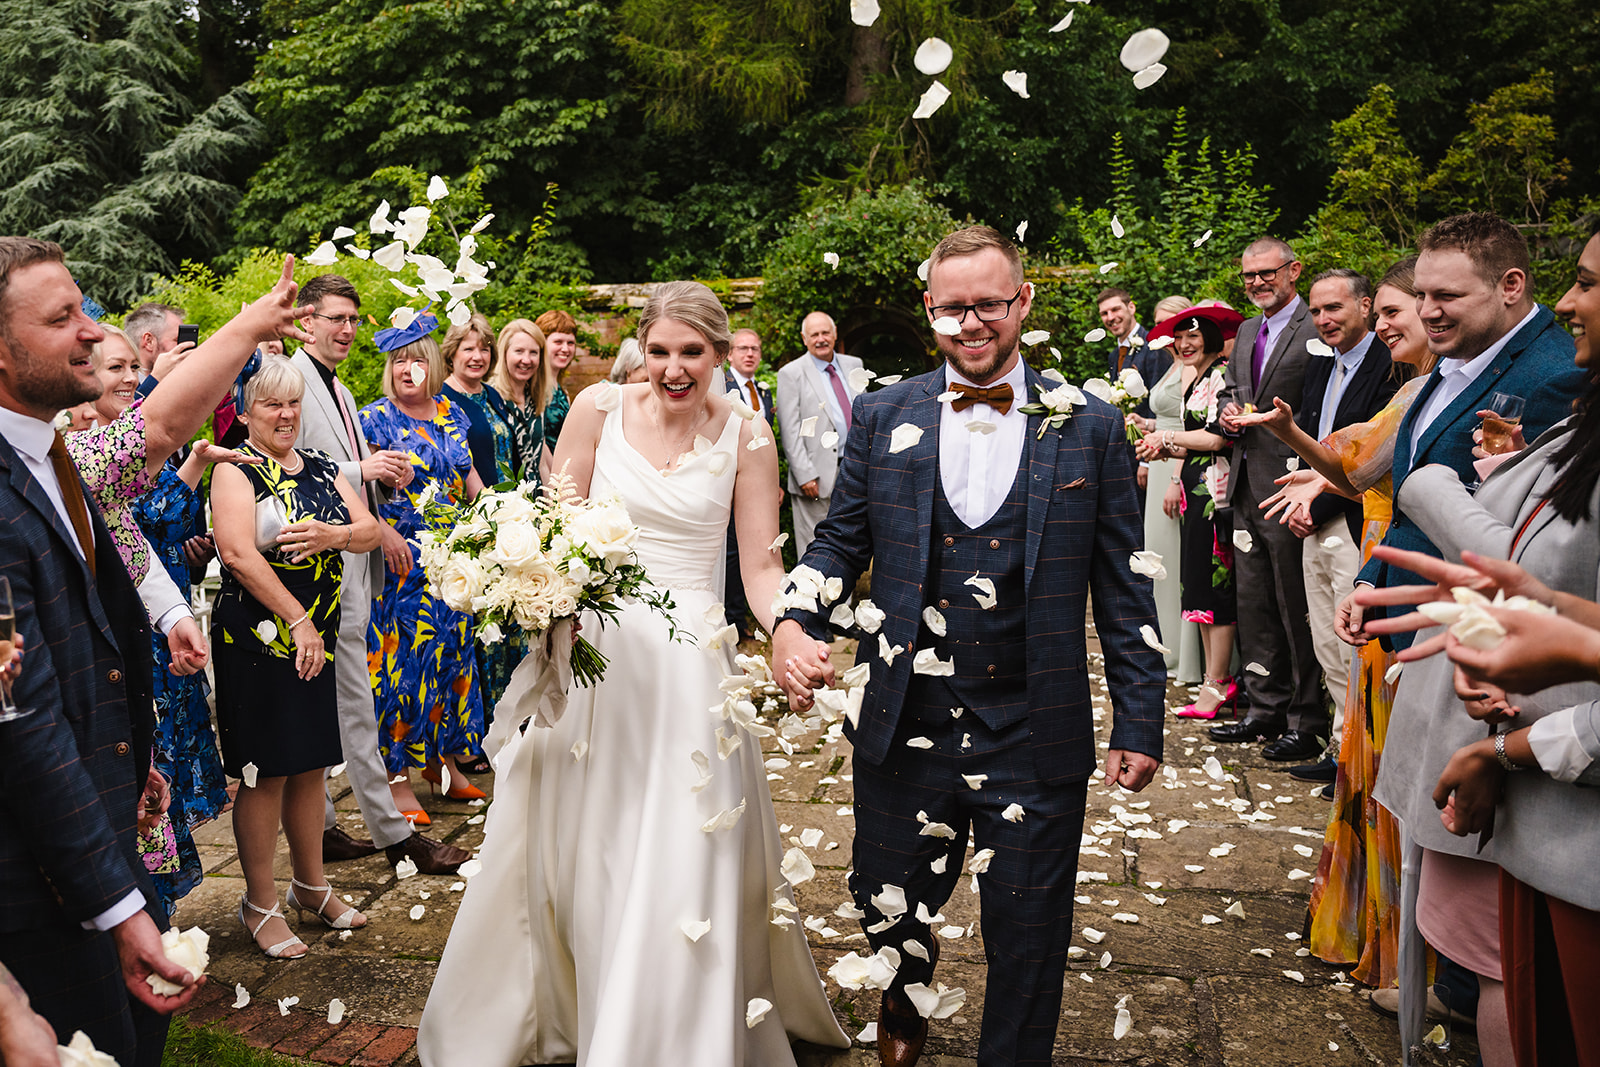 Bride and groom walking through confetti after their ceremony at stapleford park by Amanda Forman Photography